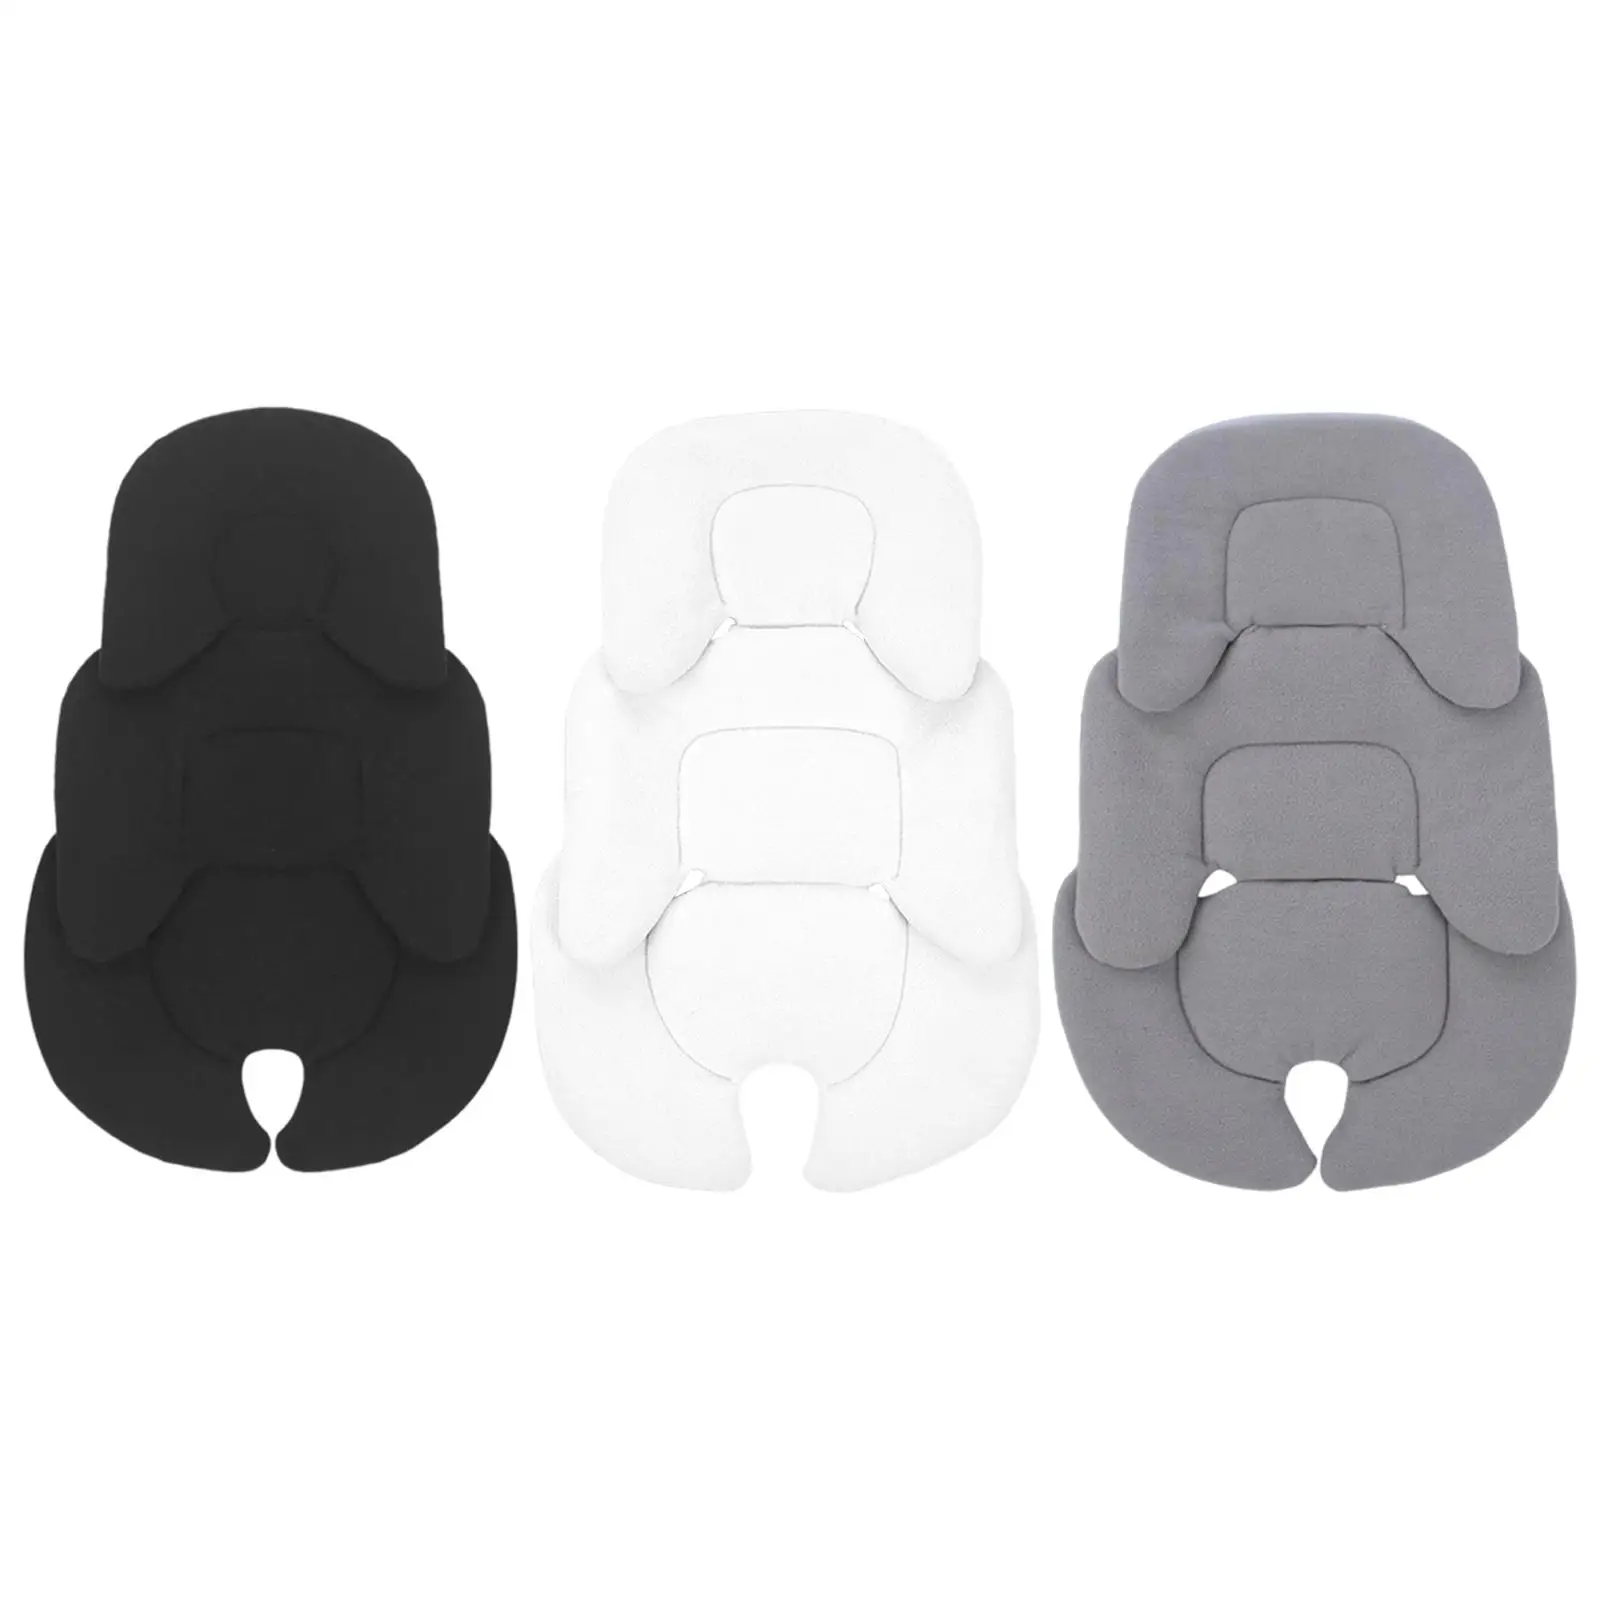 Baby Stroller Cushion Head and Body Support Pillow Car Seat Pad Liner Baby Shower Gifts Car Seat Insert for Baby Newborn Infant